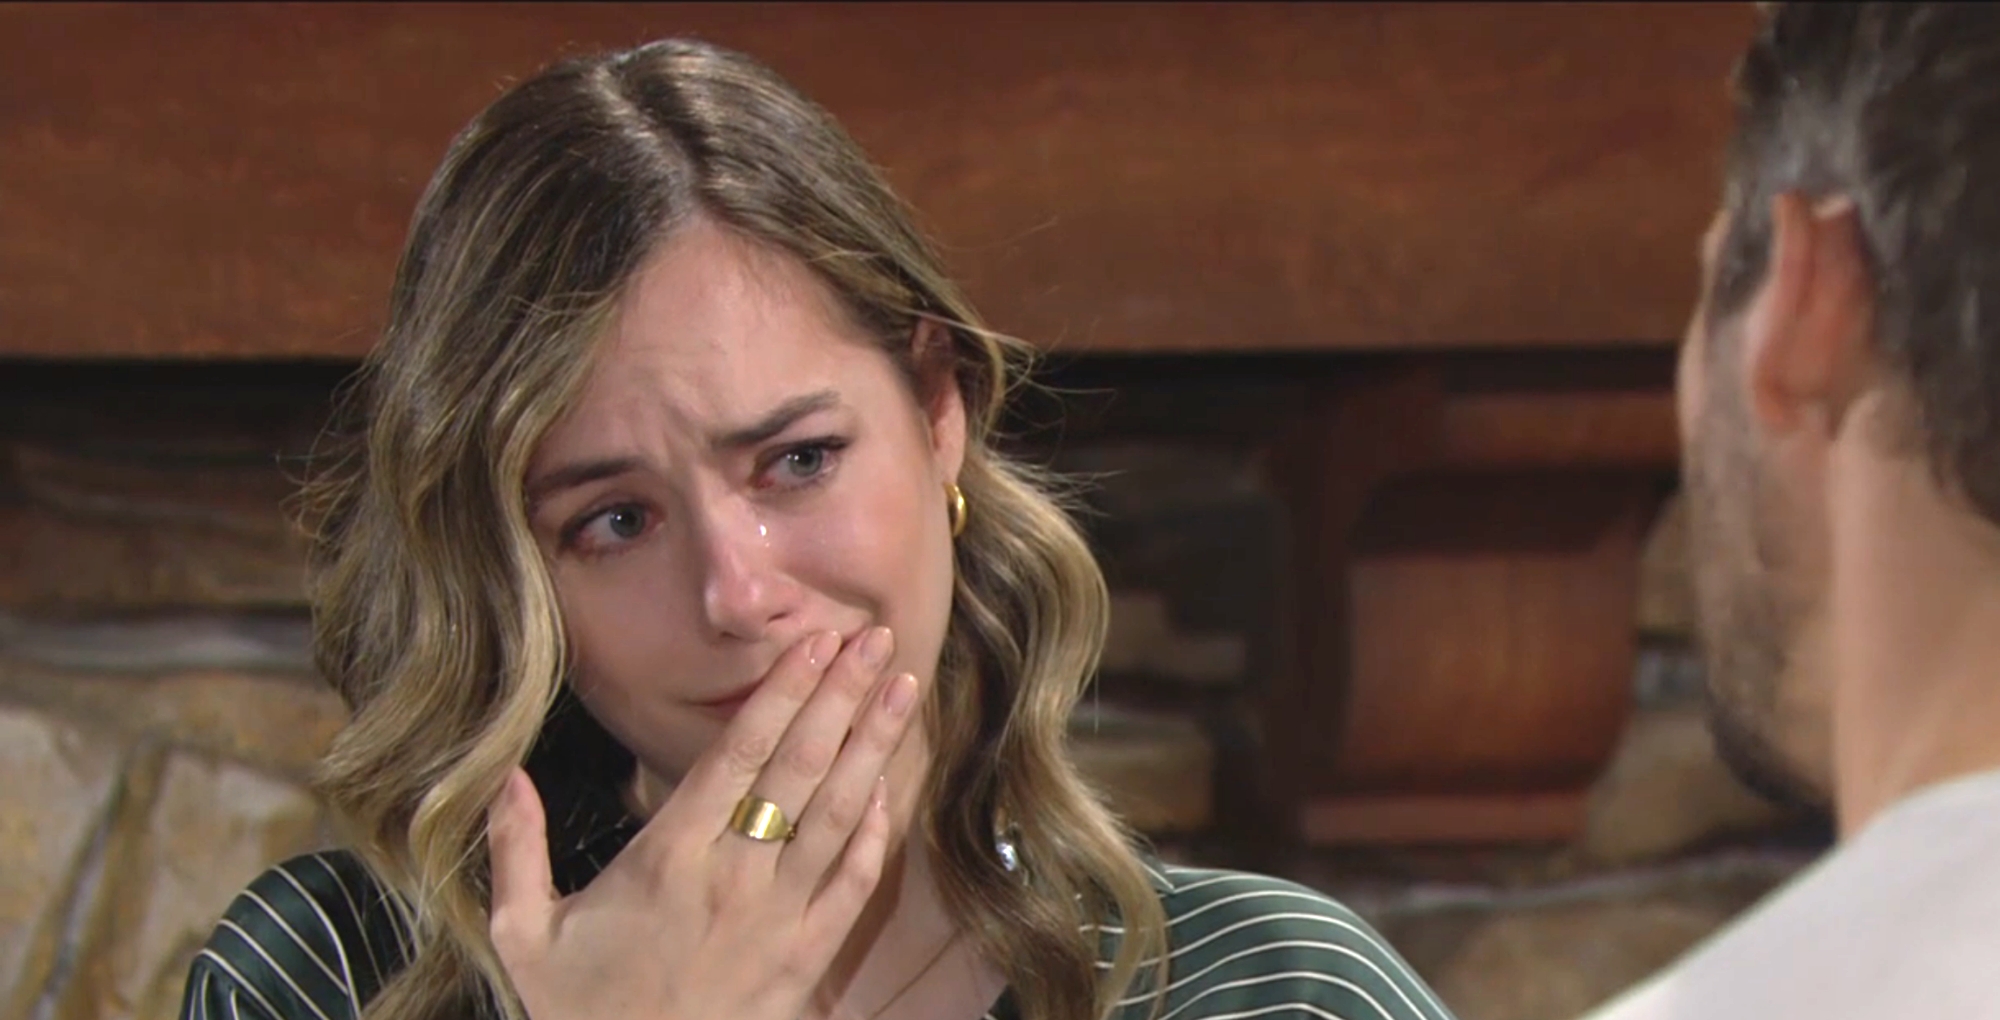 the bold and the beautiful recap for tuesday, march 14, 2023, hope logan